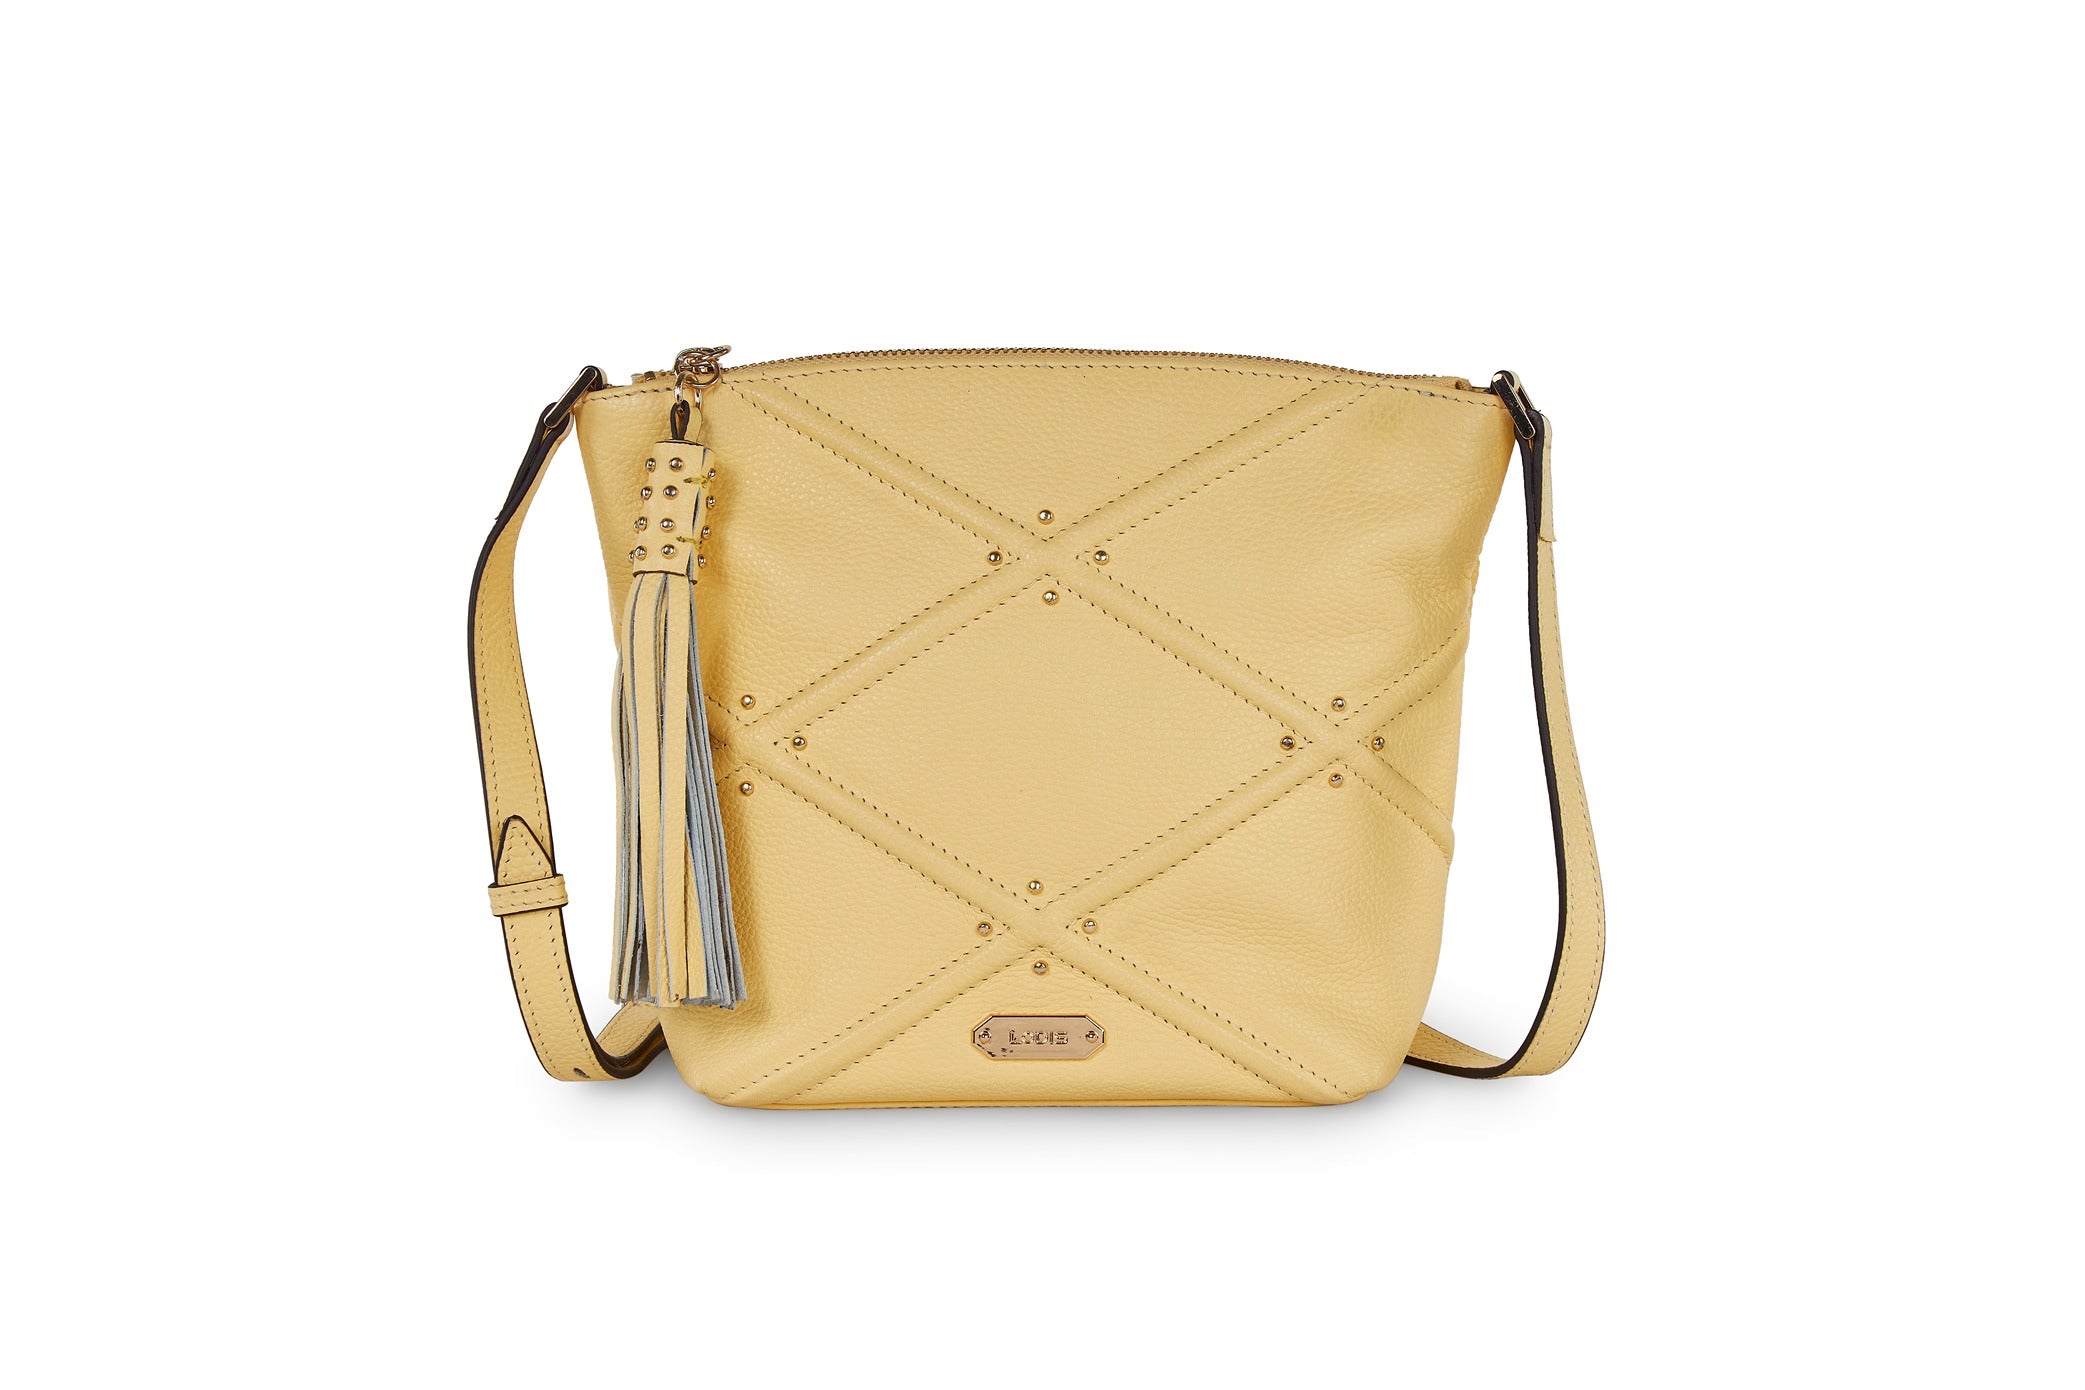 Shop Now The ARIA CROSSBODY Made With Pure Leather | Lodis